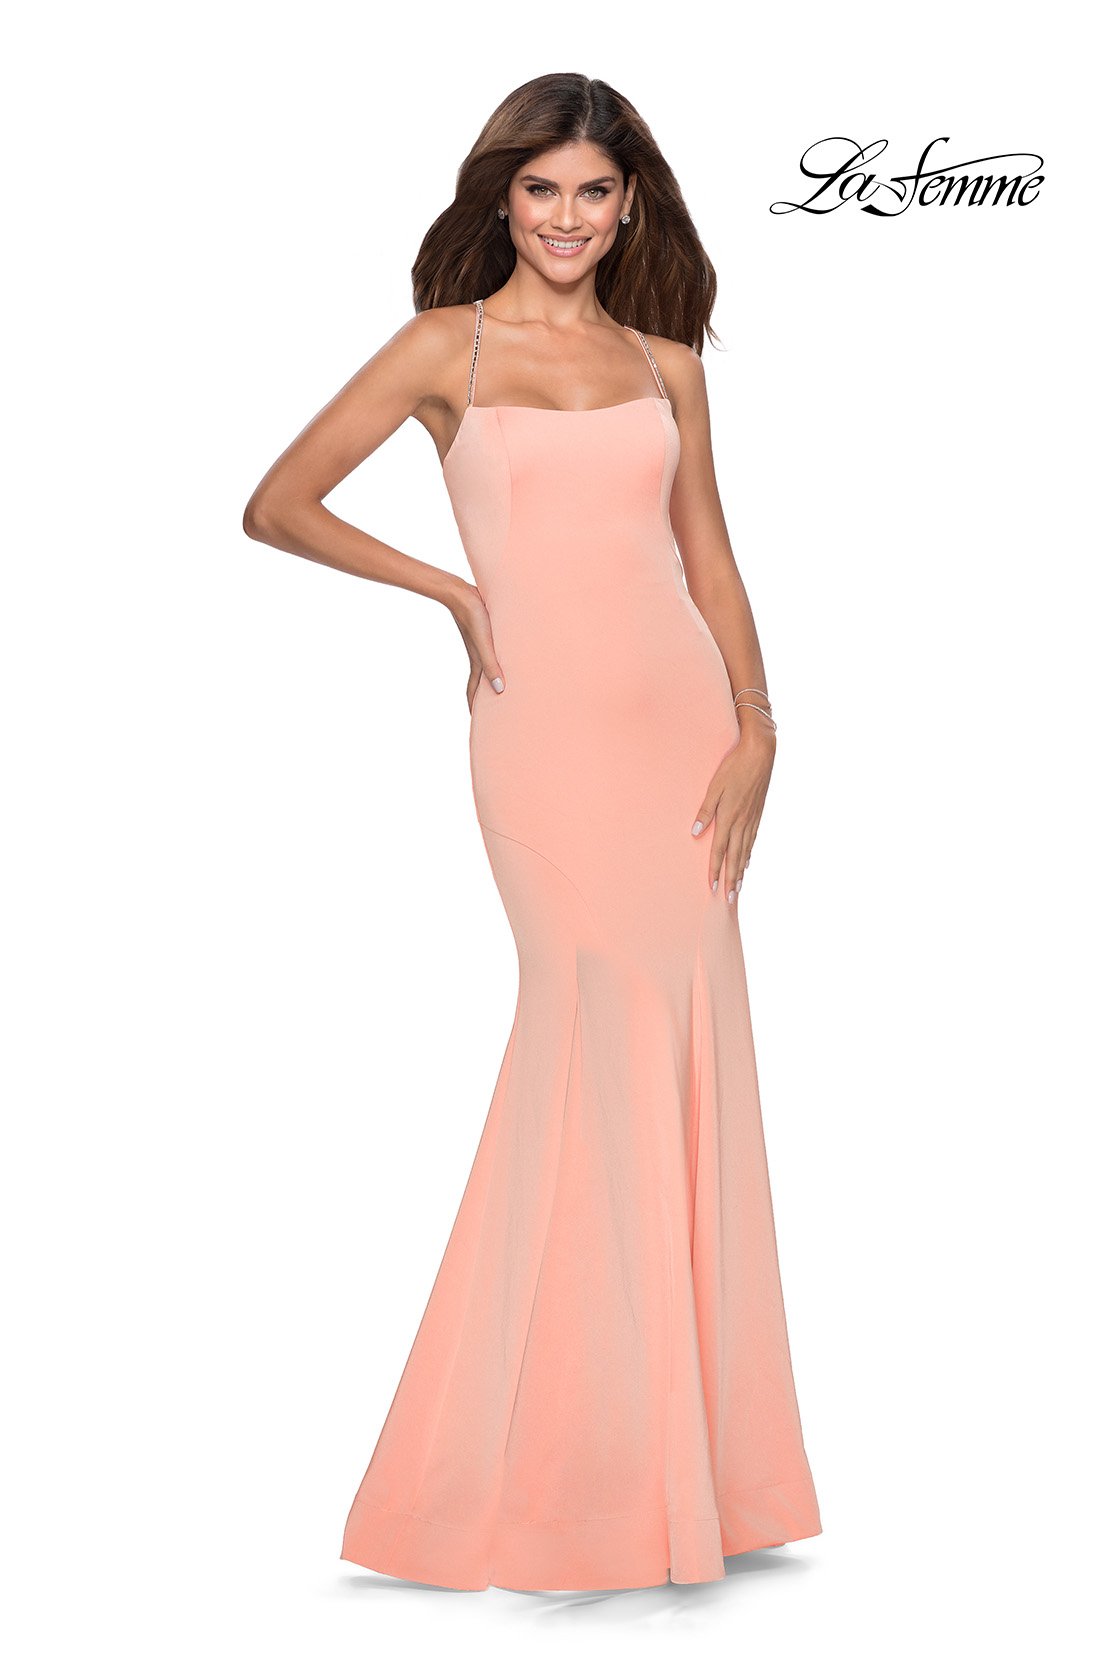 La Femme 28526 dress images in these colors: Black, Deep Red, Electric Blue, Peach.